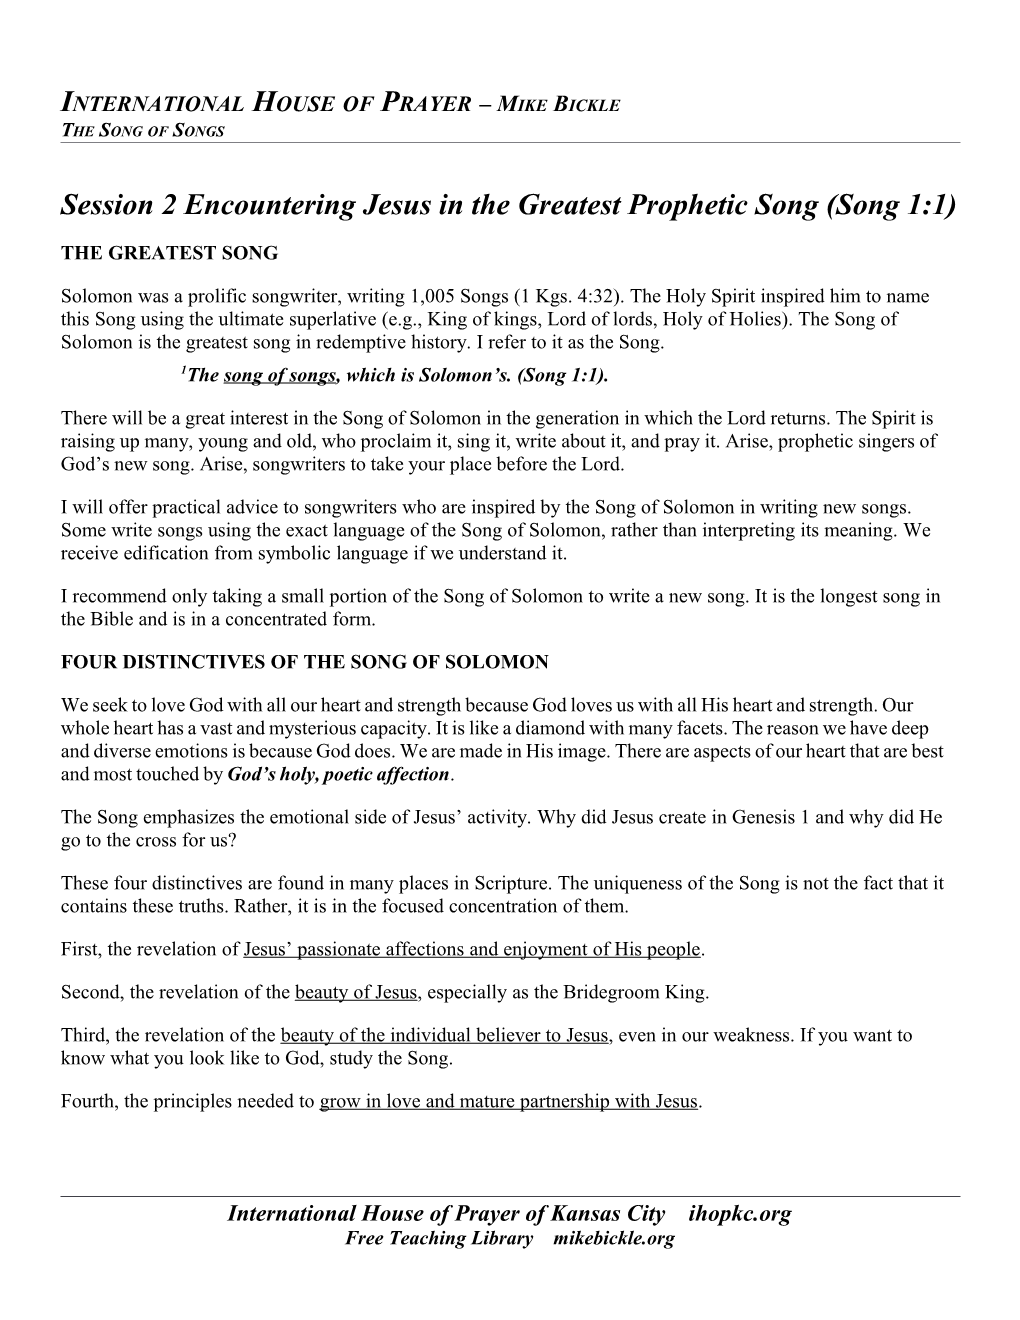 Session 2 Encountering Jesus in the Greatest Prophetic Song (Song 1:1) Page 4